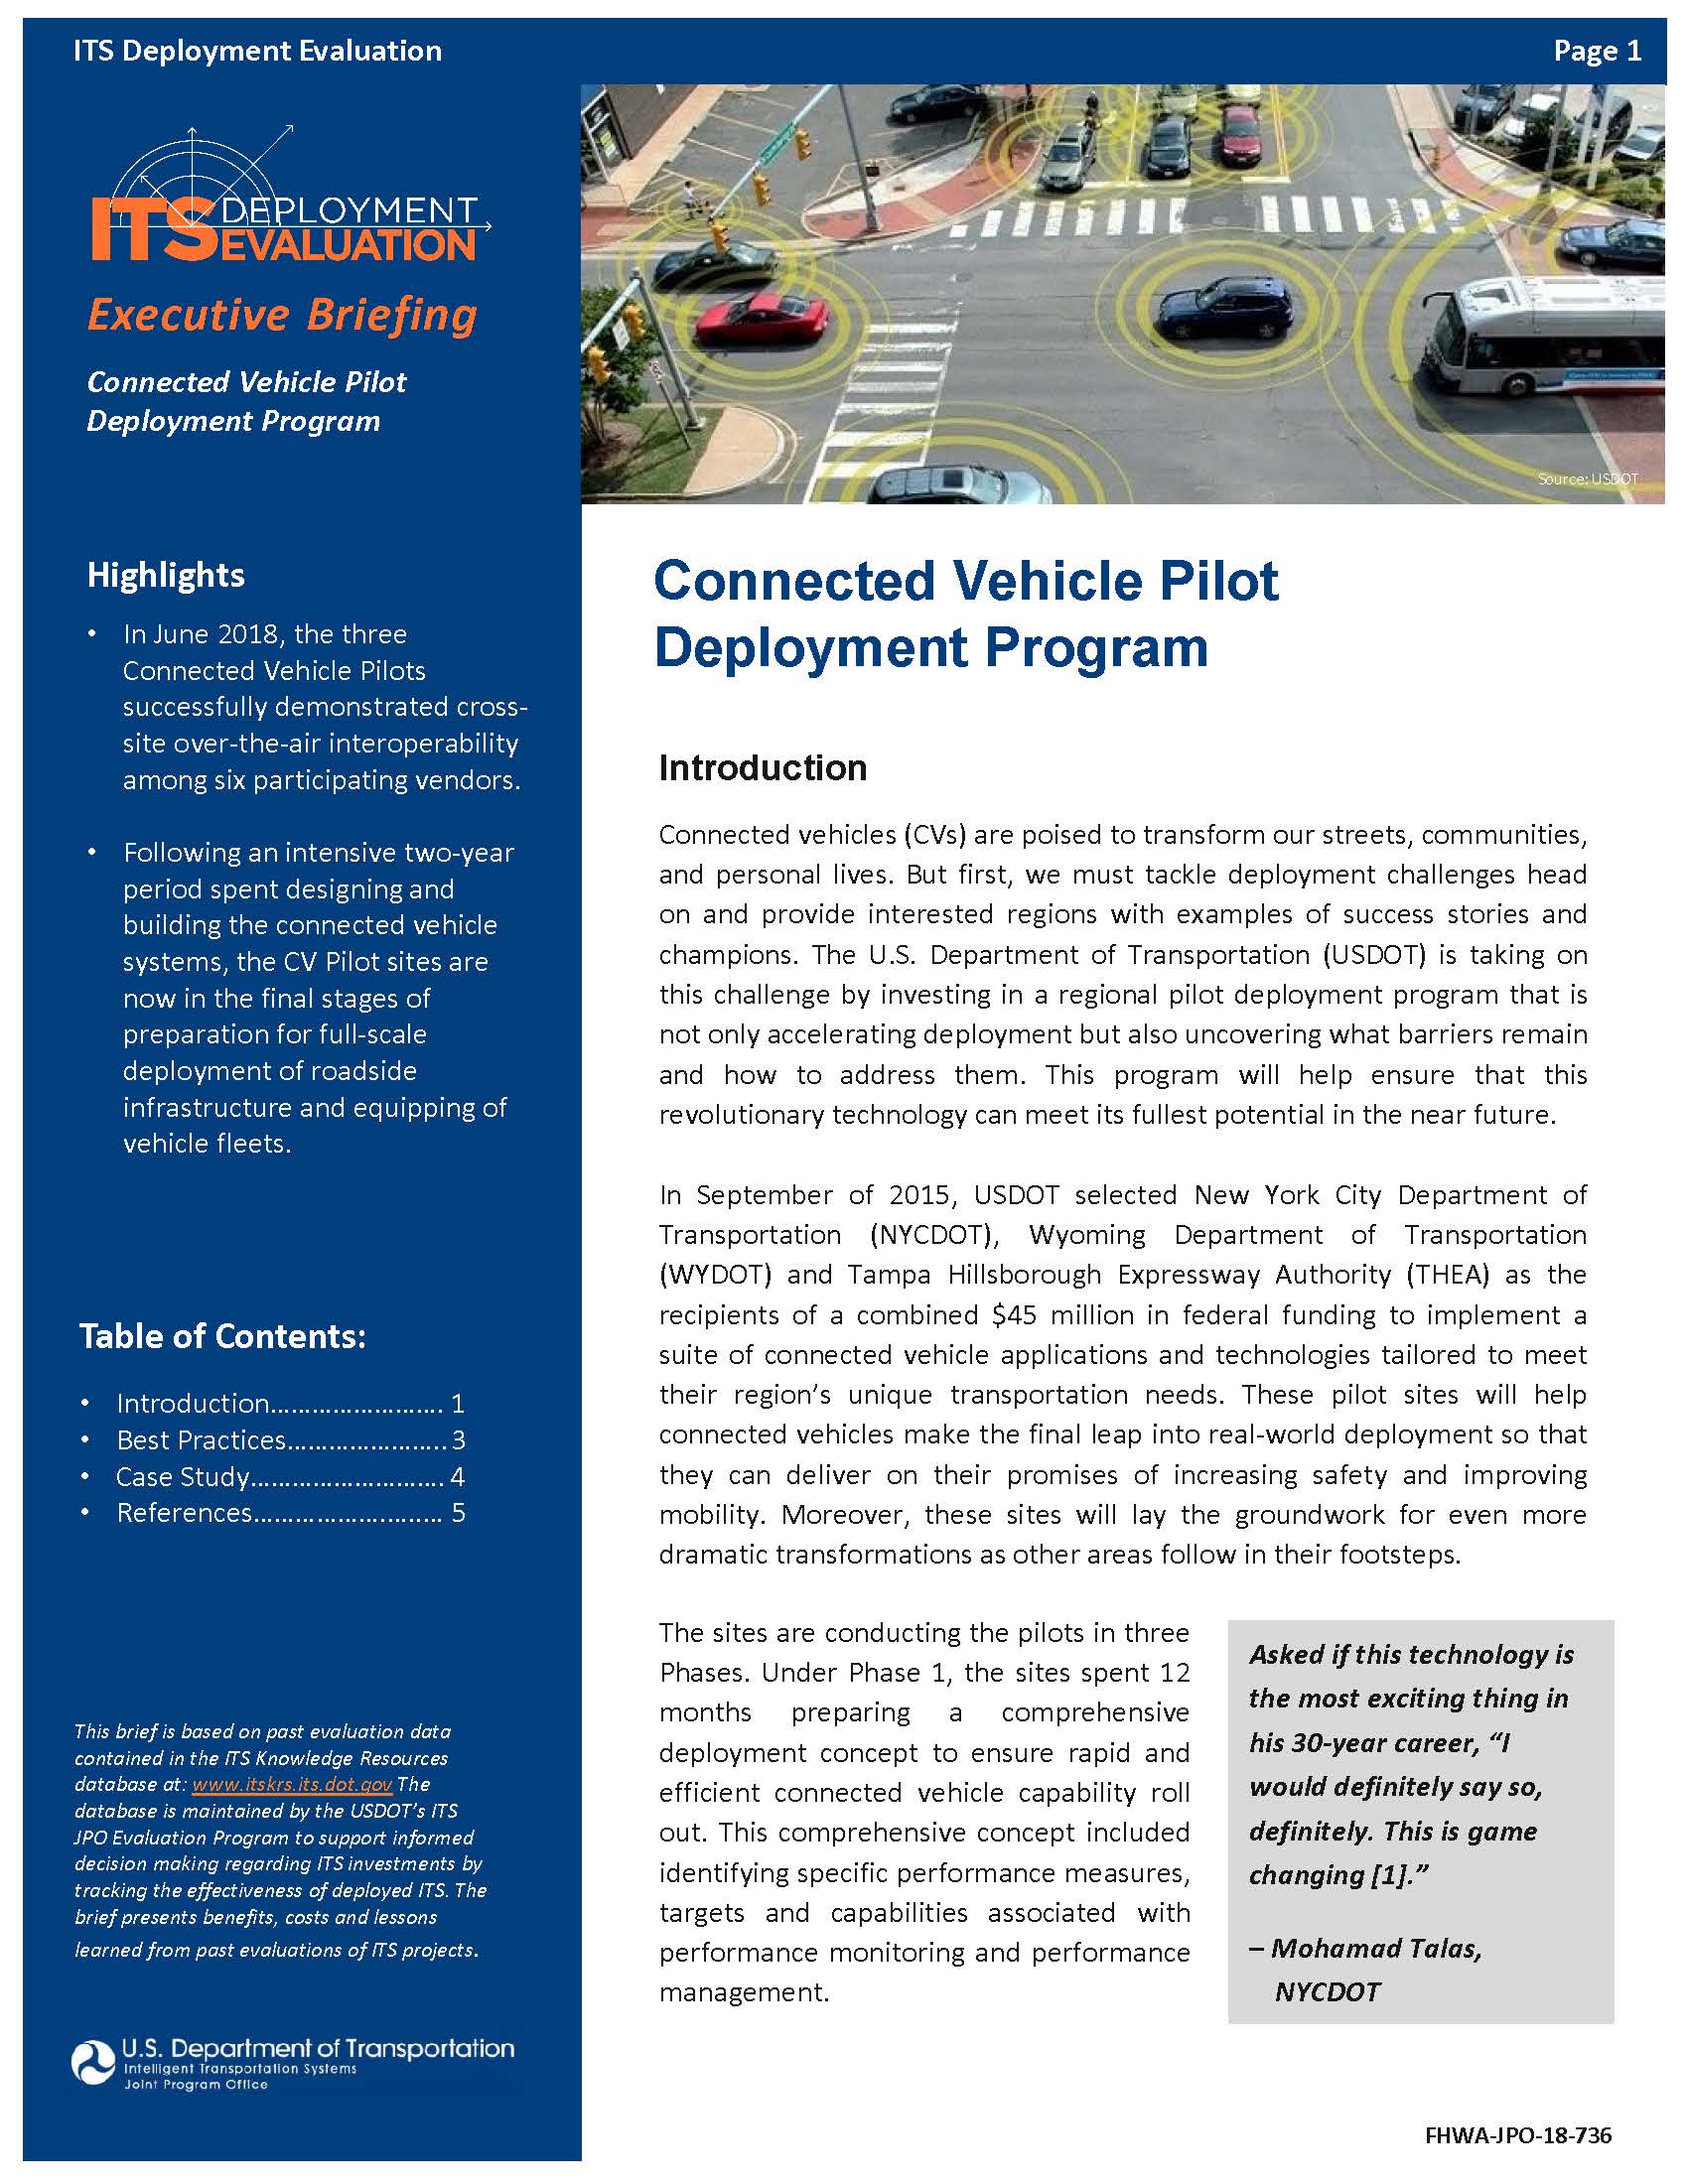 Cover Page of the Connected Vehicle Pilot Deployment Program Executive Briefing